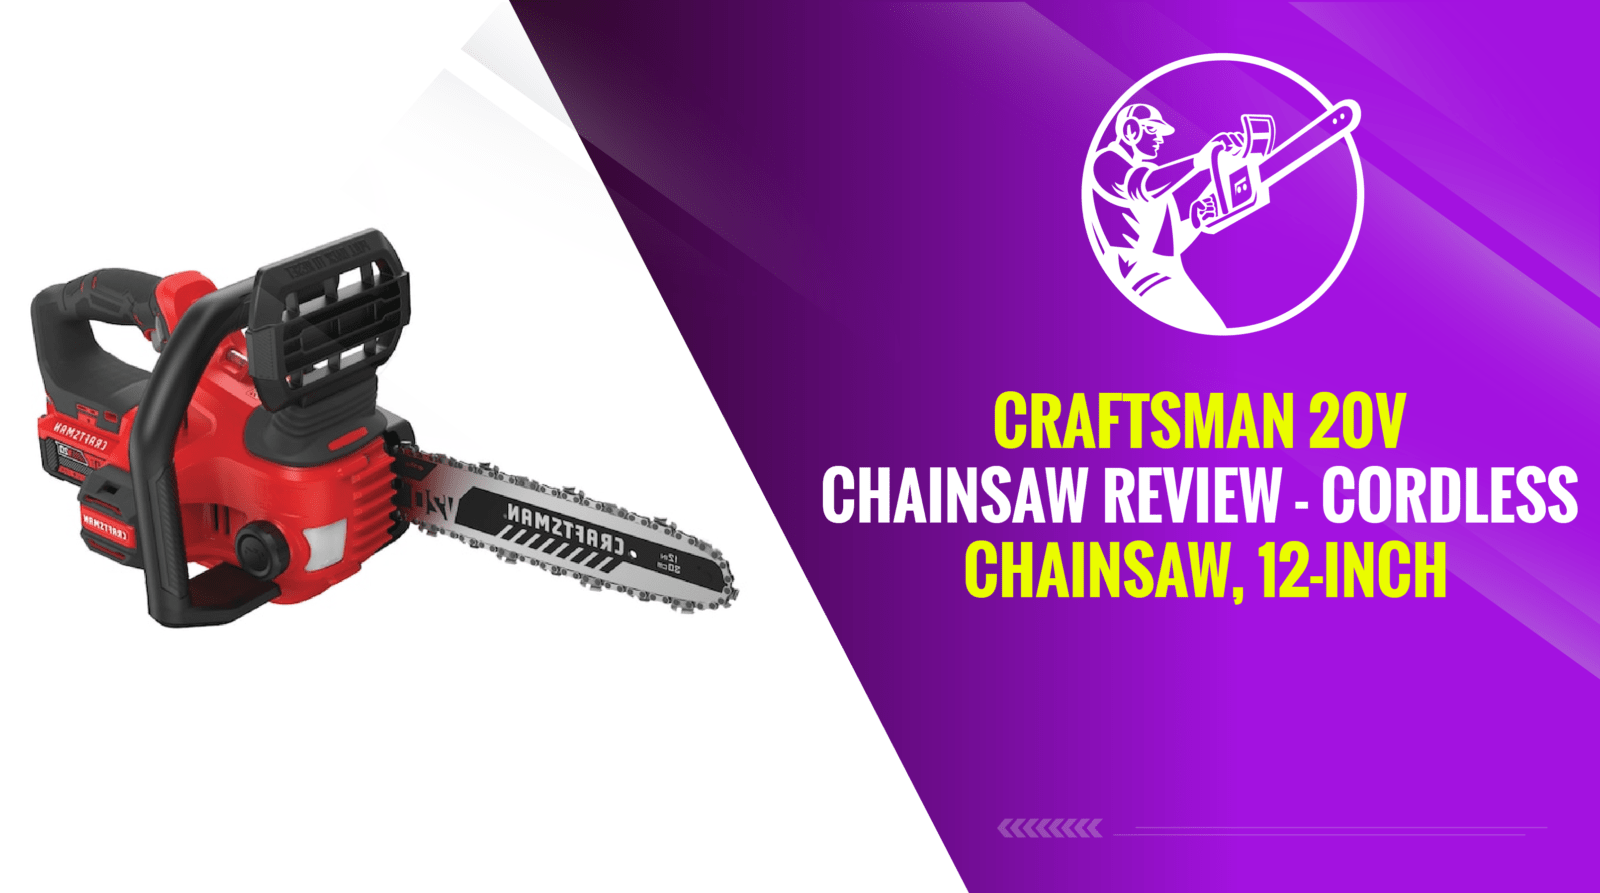 Craftsman 20v Chainsaw Review - Cordless Chainsaw, 12-Inch